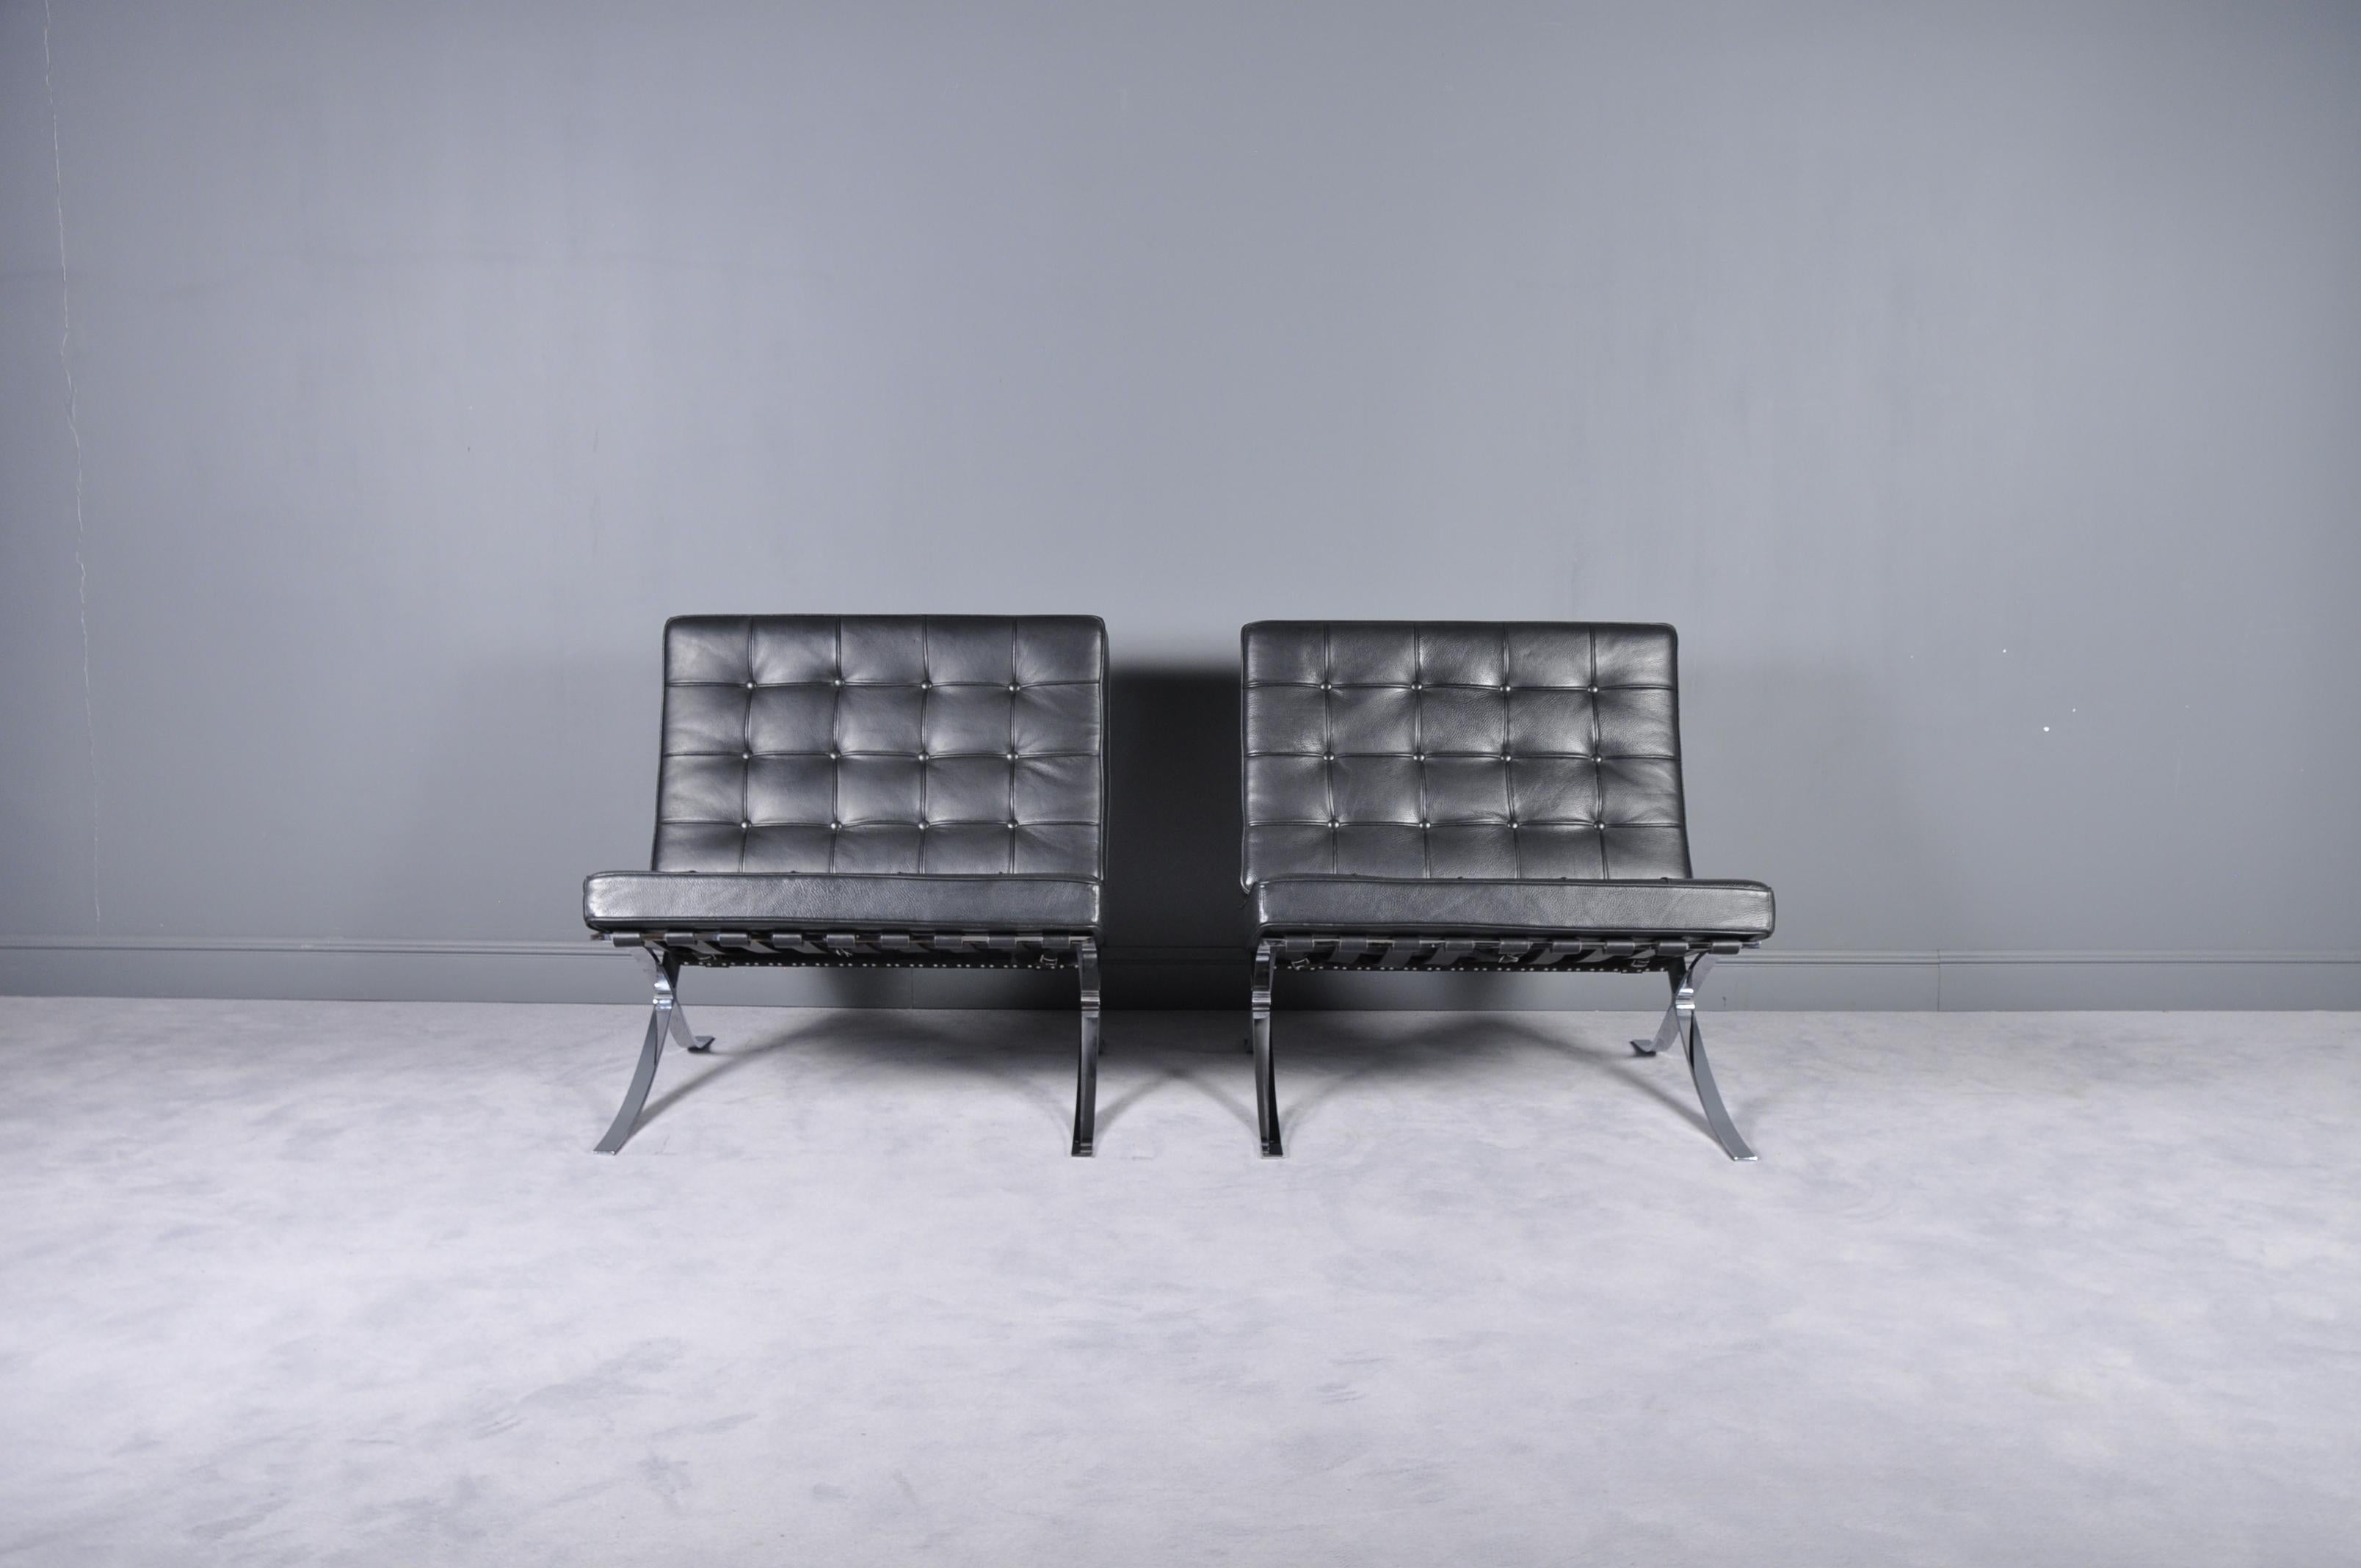 Set of two Barcelona lounge chairs by of Mies van der Rohe for Knoll Inc. Polished chrome structure, there are no markings or tags. They are high quality pair of chairs in excellent condition. Perfect for any midcentury or modern styled space.